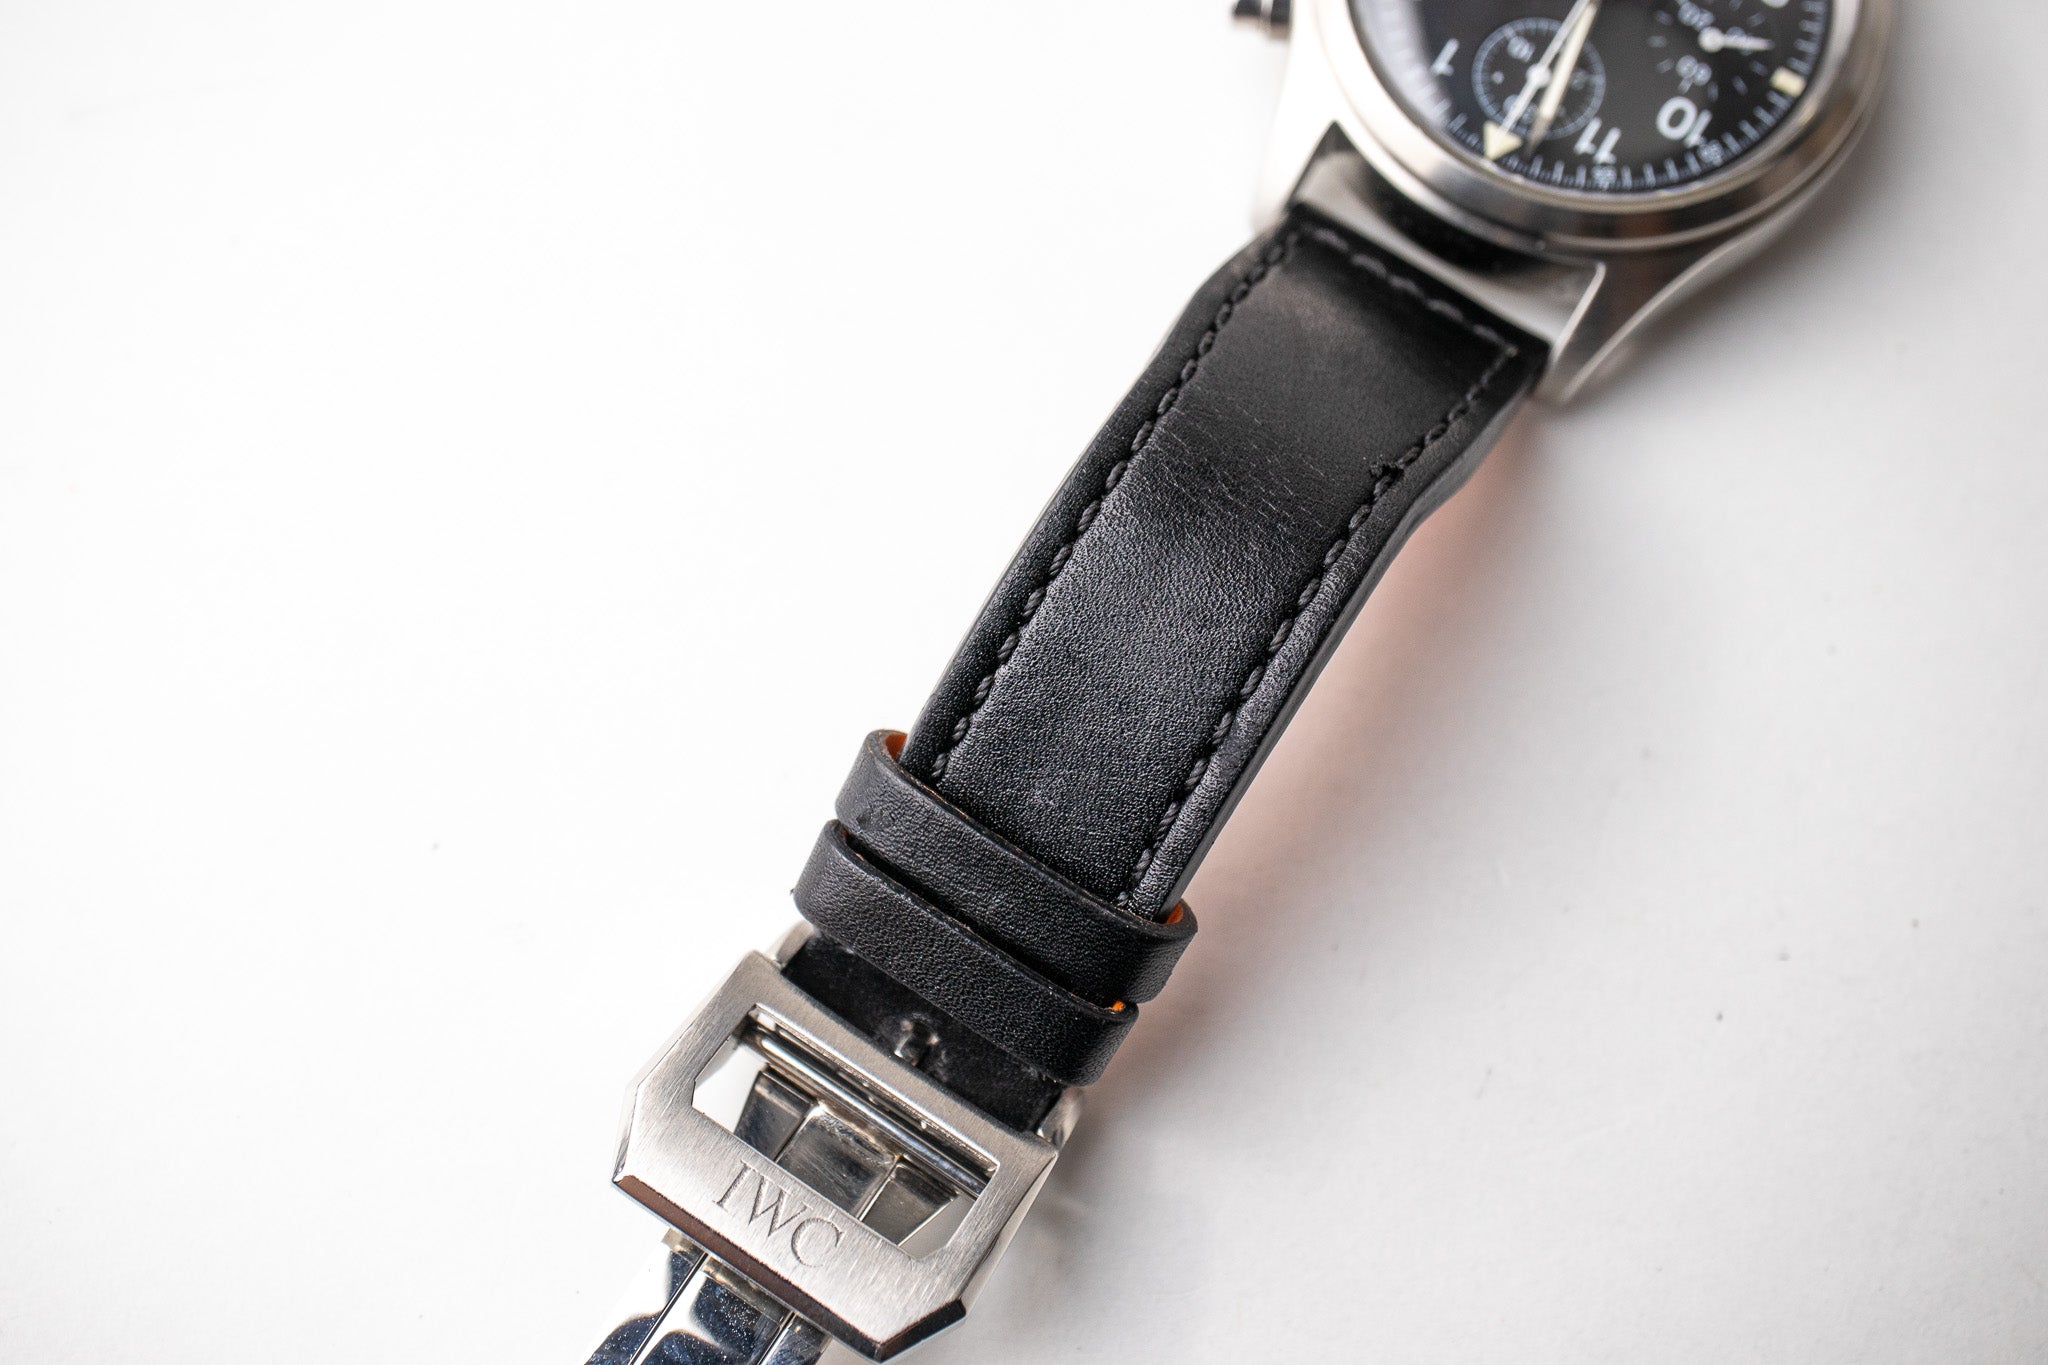 IWC Chronograph Flieger reference 3706 black leather strap with stitching and stainless steel deployant clasp